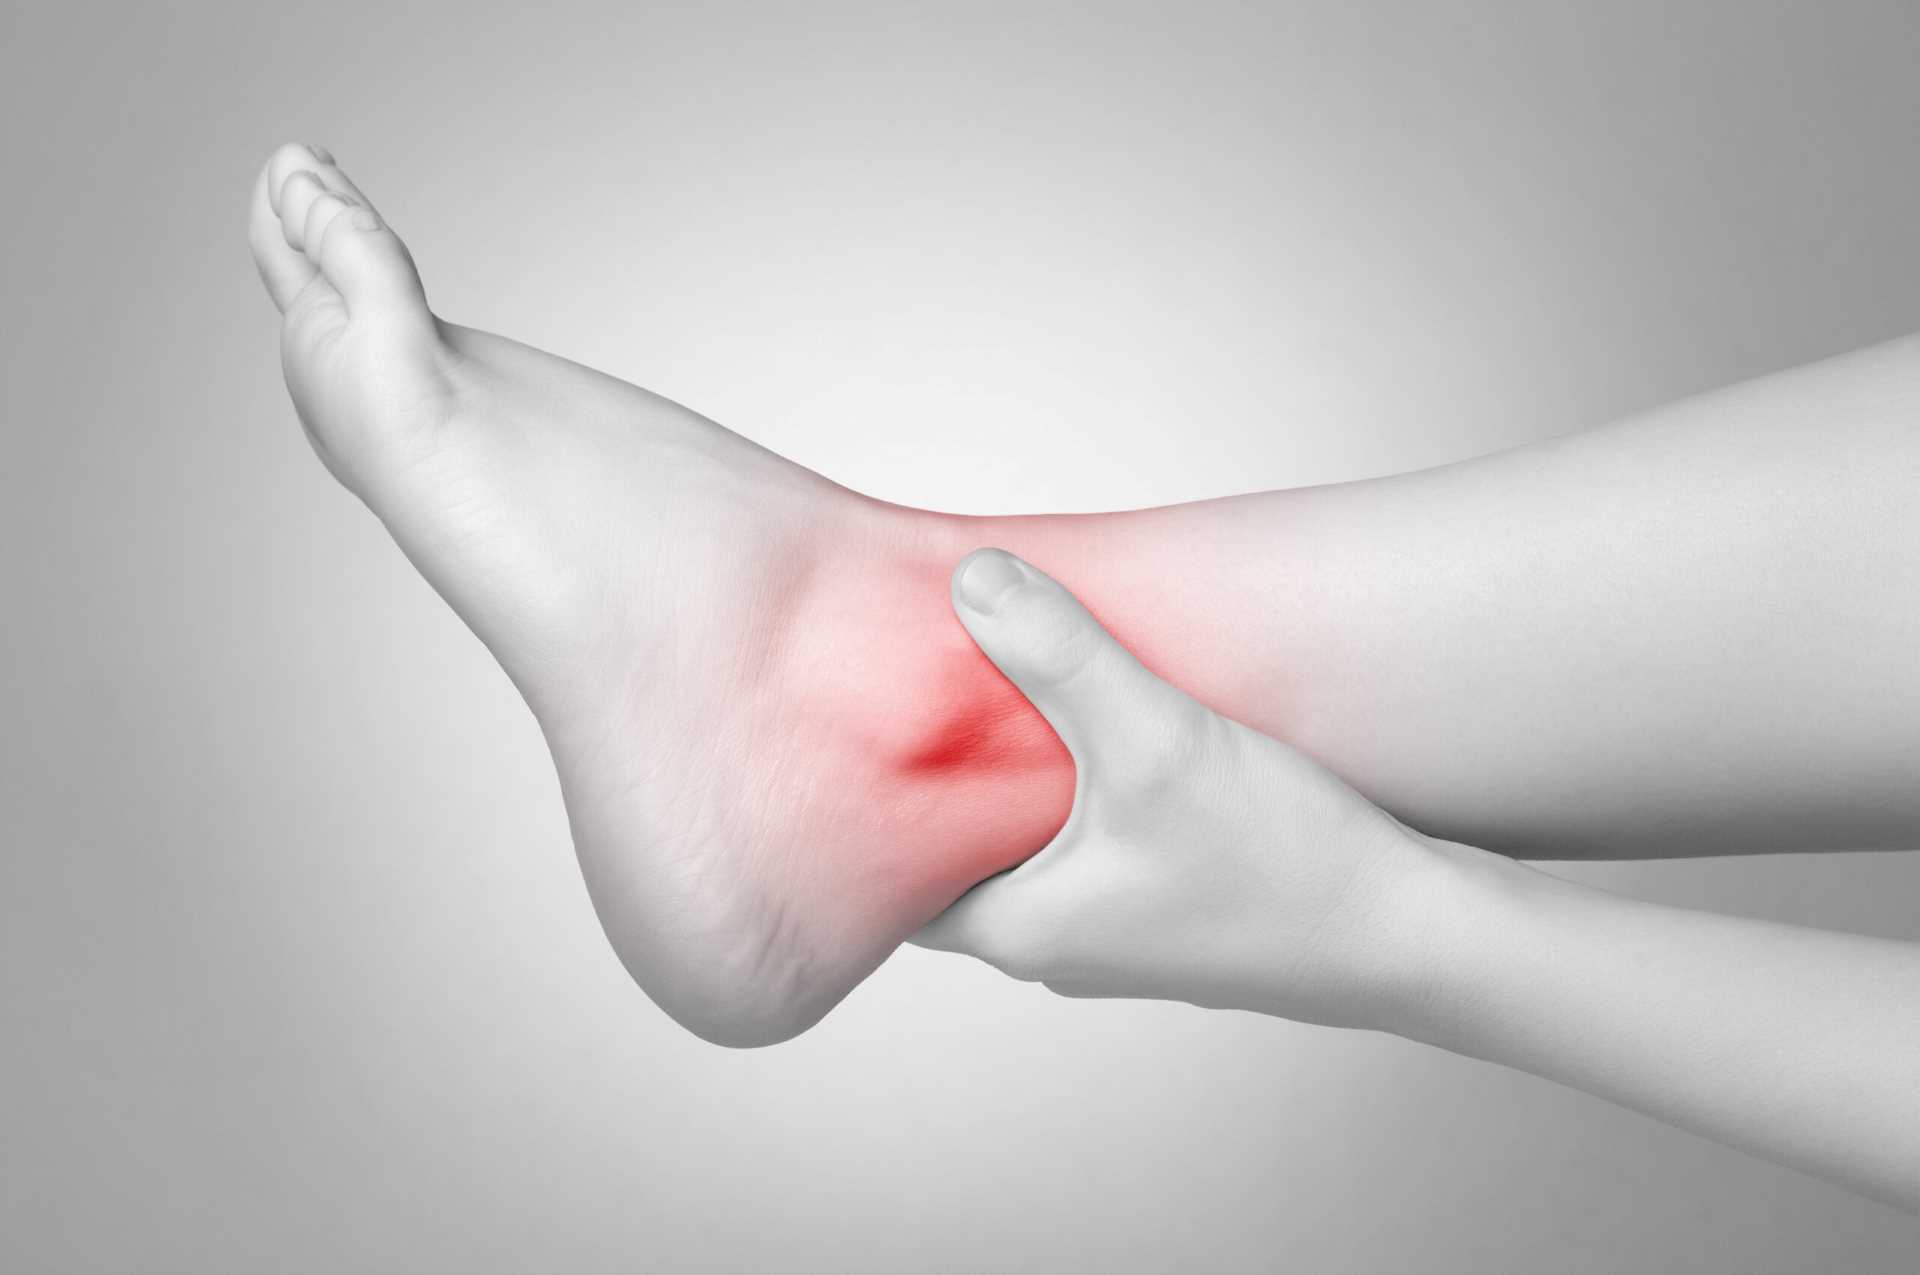 Chronic ankle sprain and instability – Caring Medical Florida